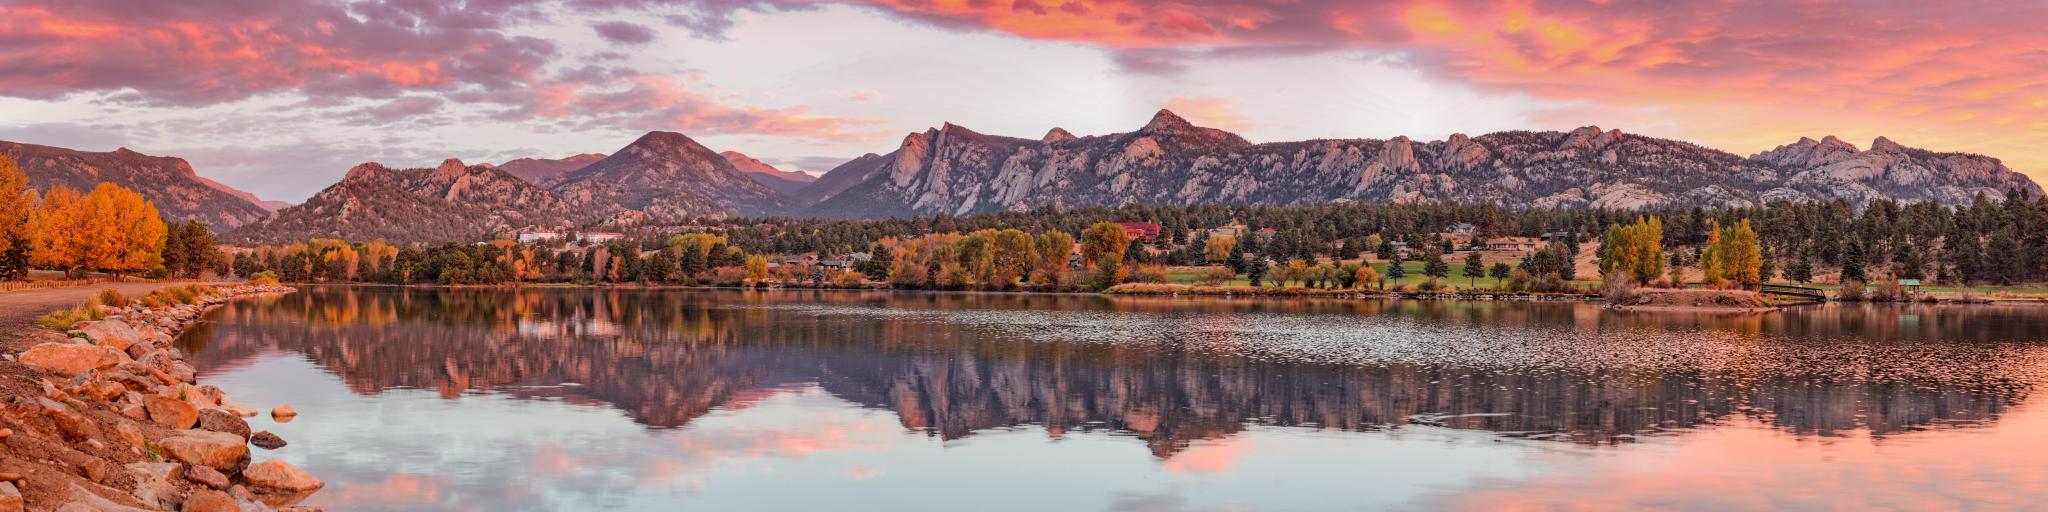 Rocky Mountain National Park, Colorado with a fiery Sunrise over Estes Park, with a lake in the foreground and trees in autumn colour and mountains in the background on the horizon. 